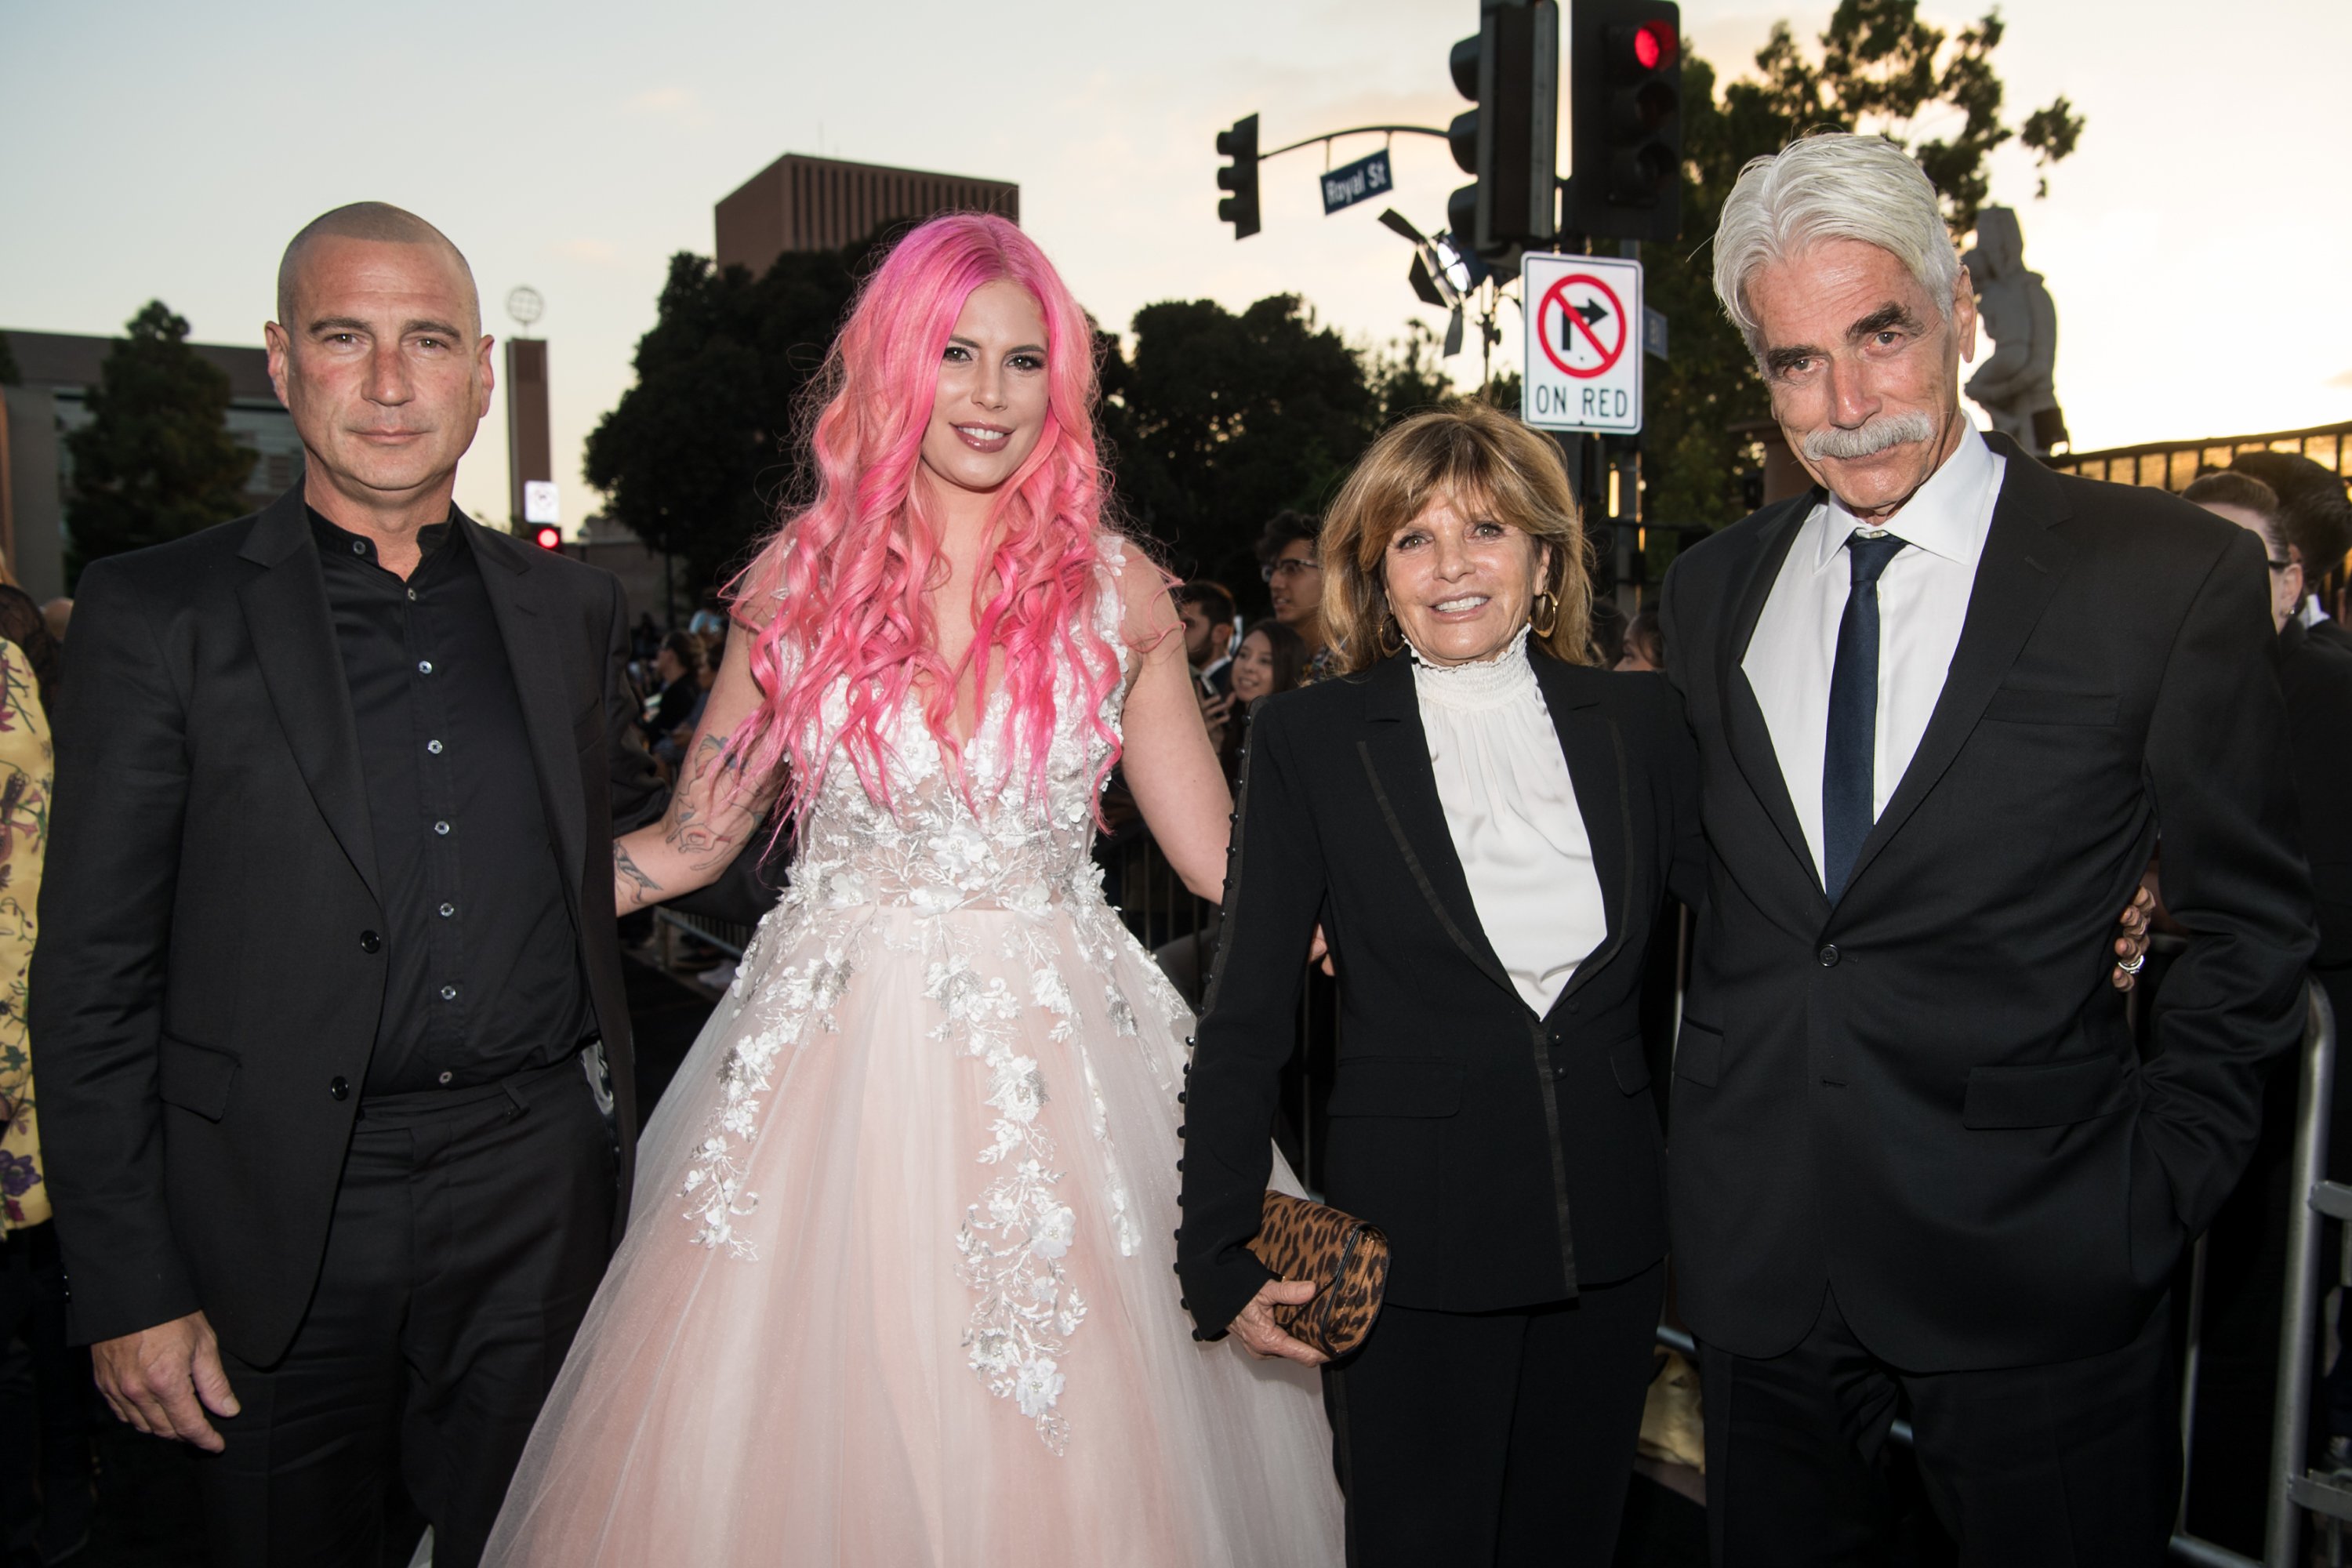 Randy Christopher, Cleo Rose Elliott, Katharine Ross and Sam Elliott attend the premiere of Warner Bros. Pictures' "A Star Is Born" at The Shrine Auditorium on September 24, 2018 in Los Angeles, California. | Source: Emma McIntyre/Getty Images